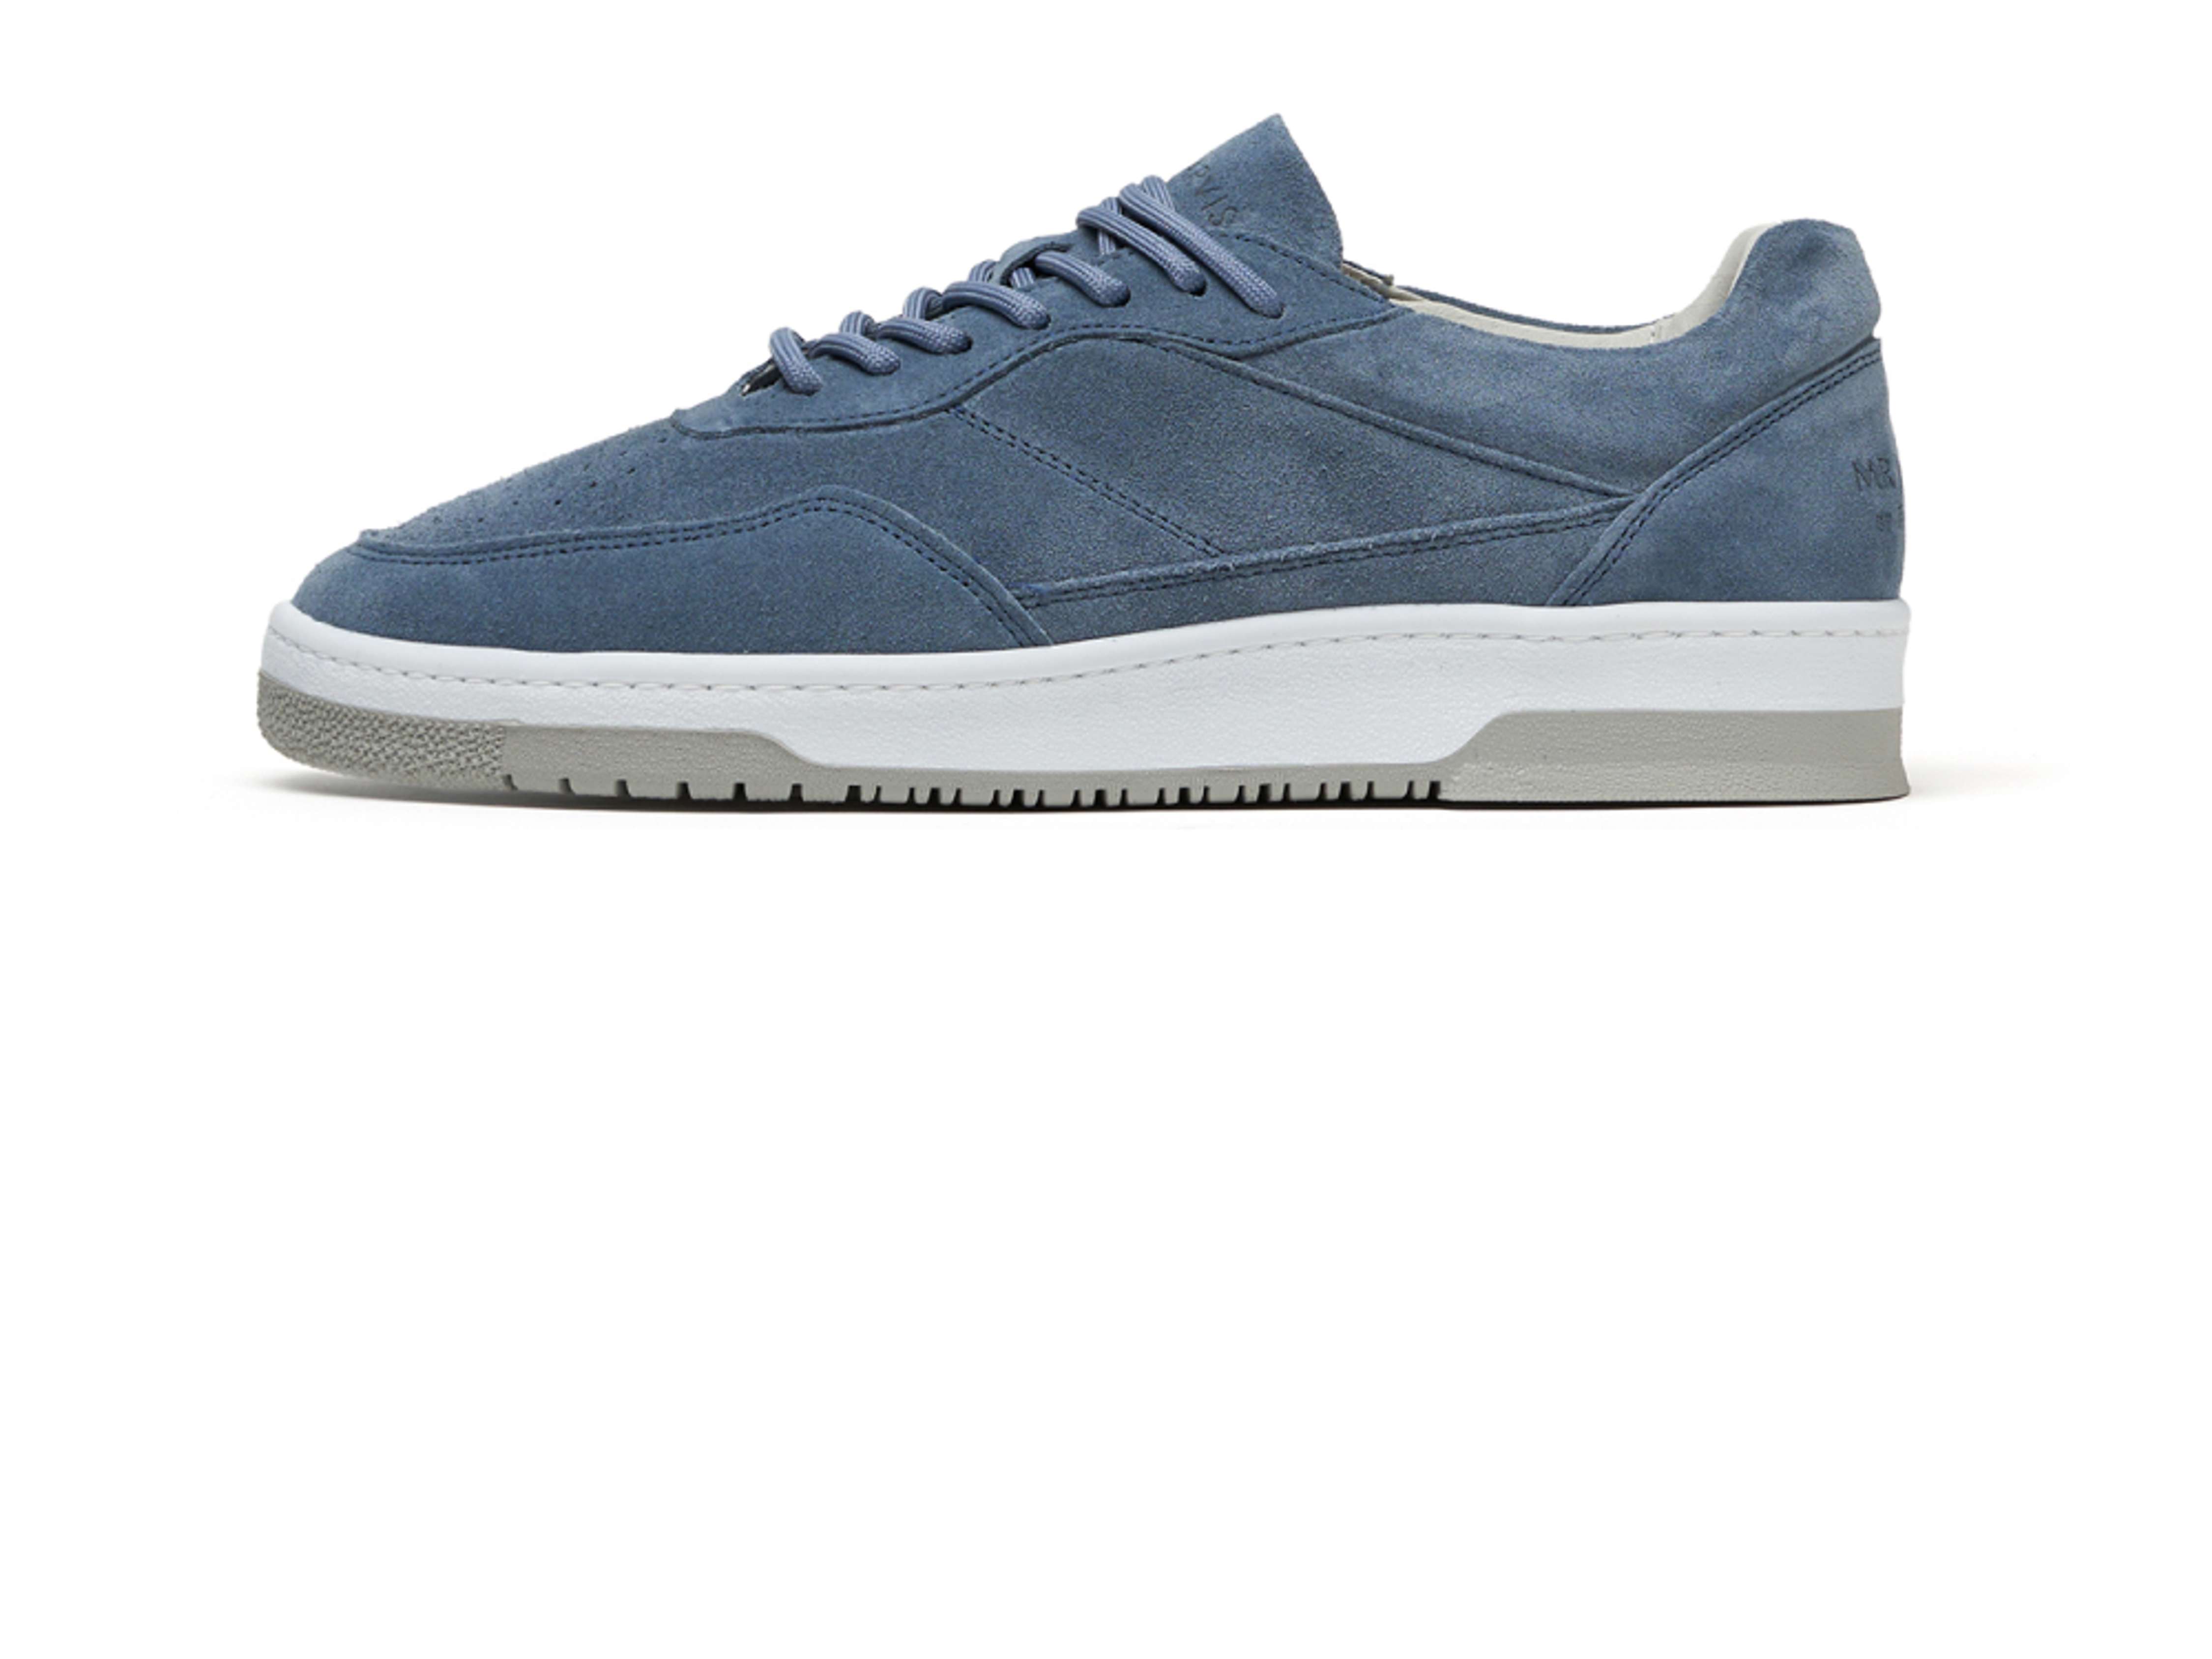 The Sneakers Suede